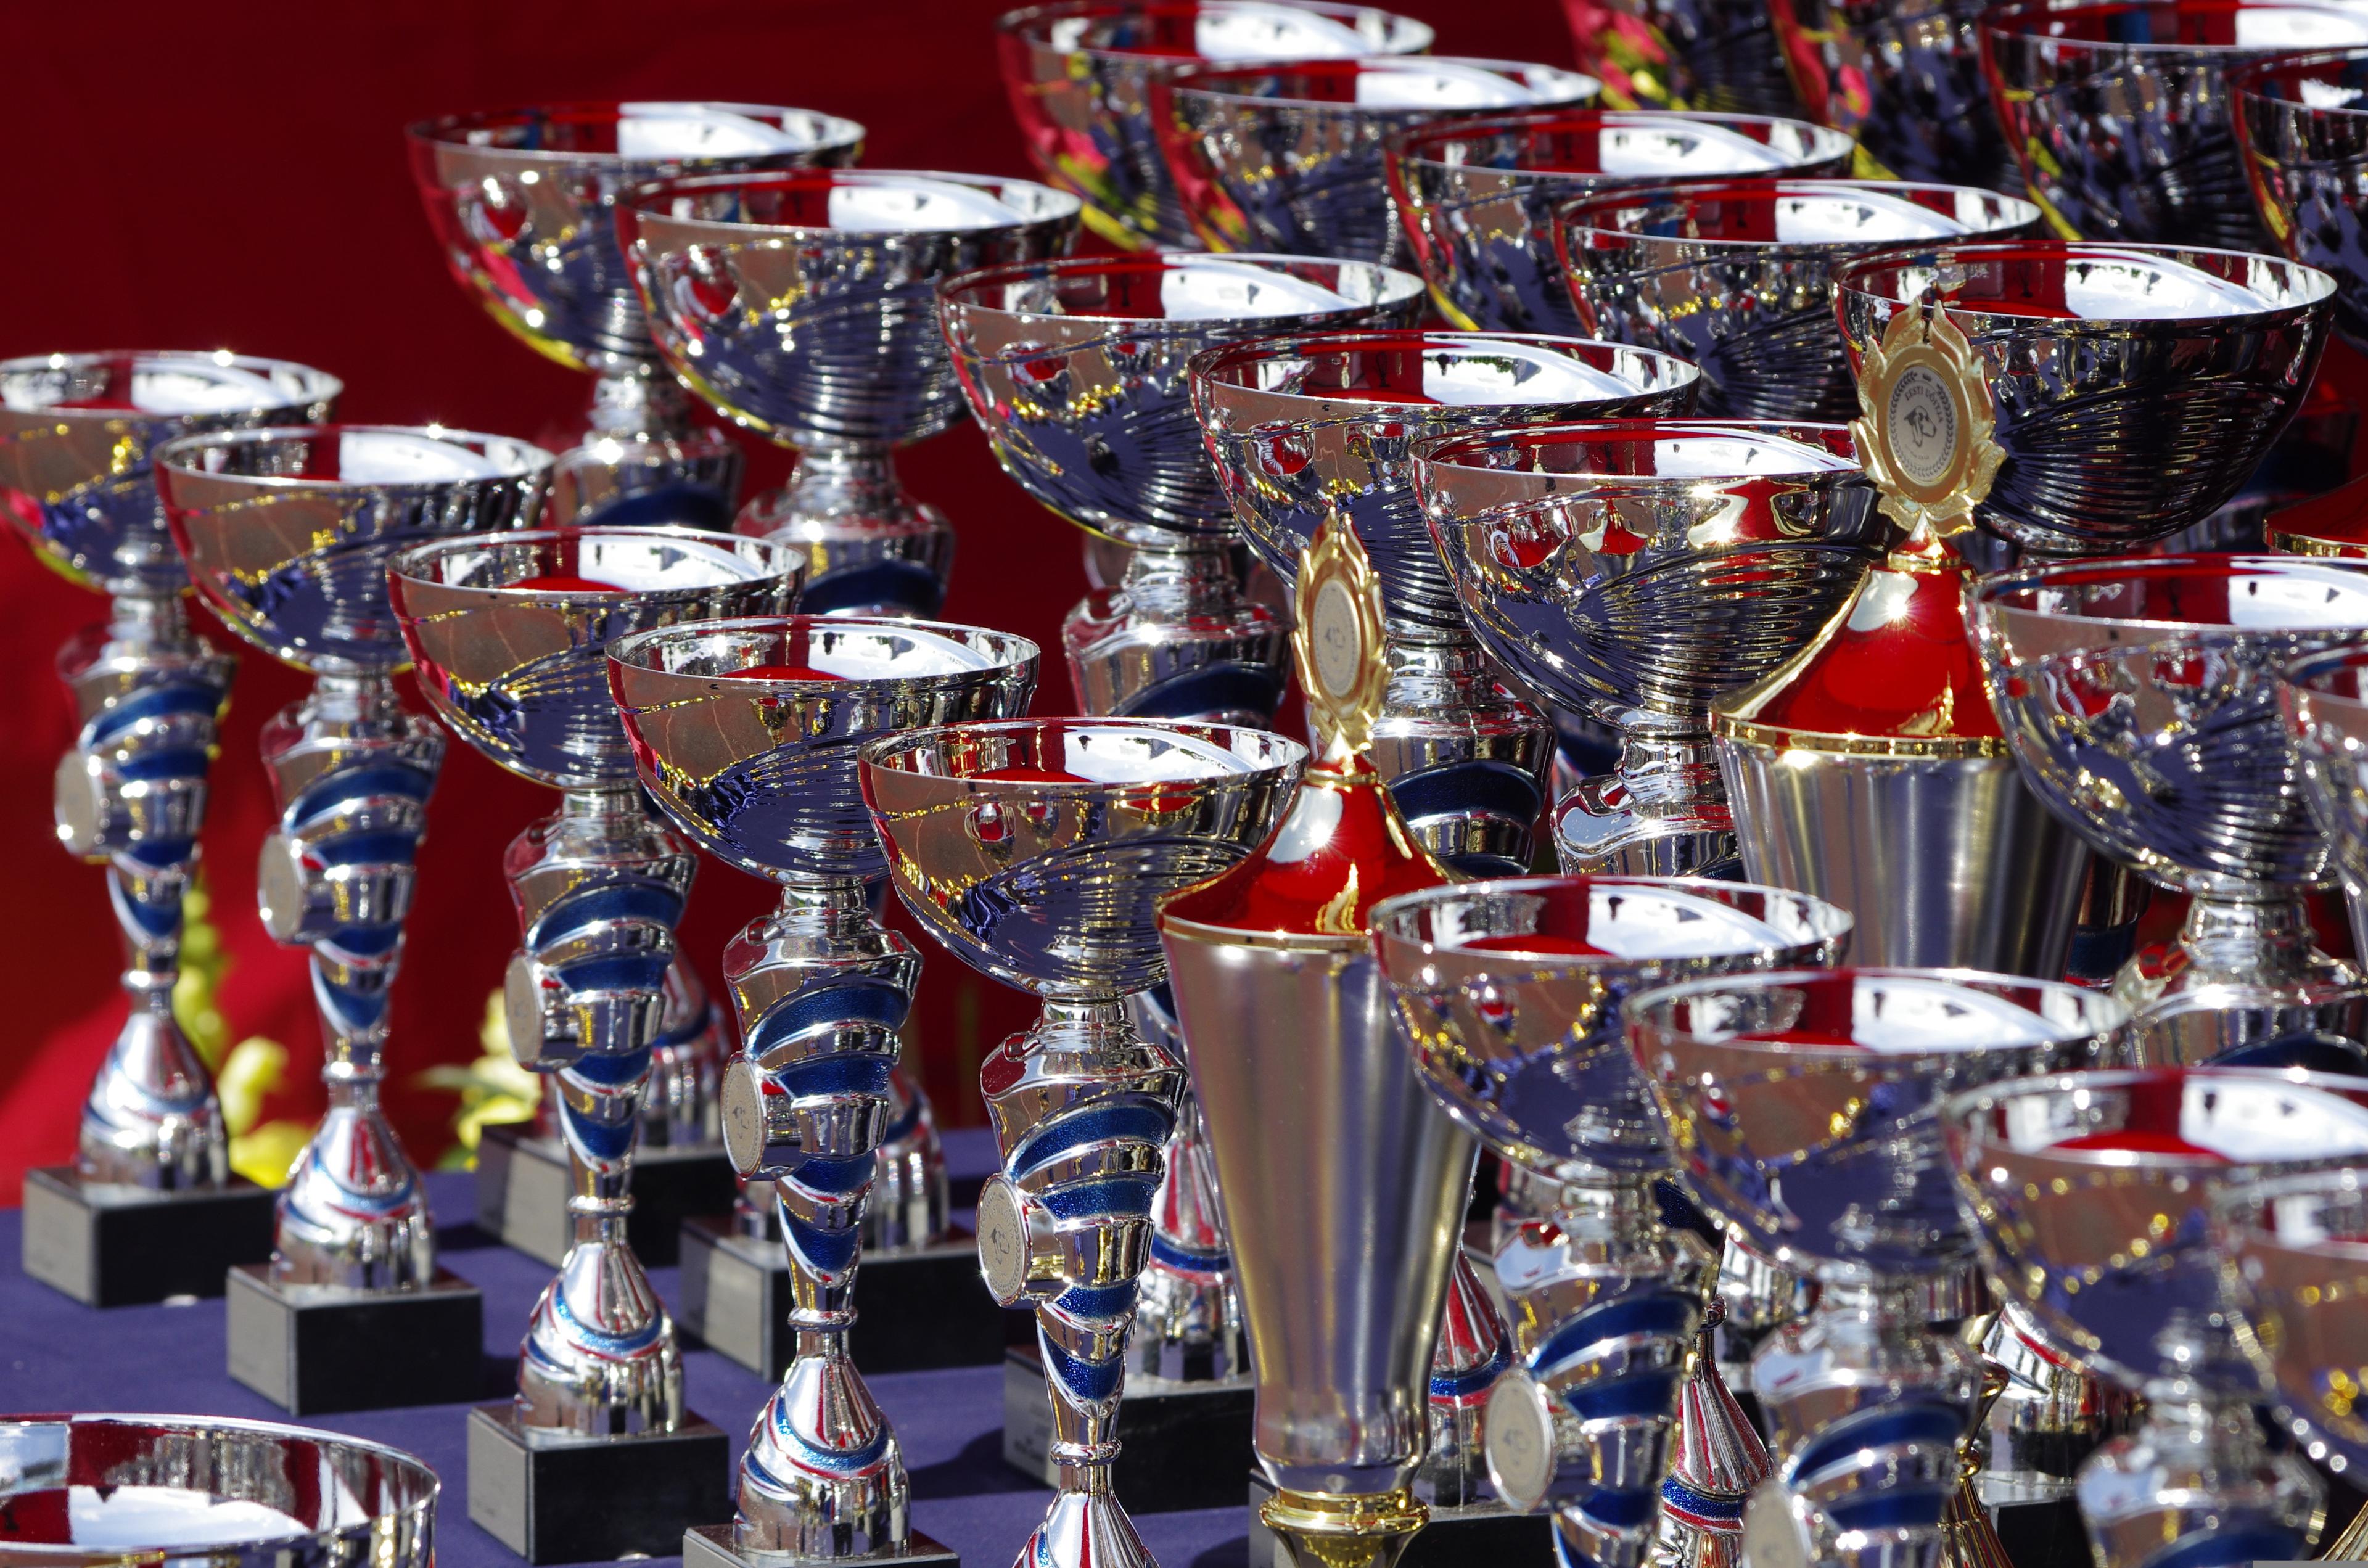 trophies all lined up in rows ready for the winners to recieve them.